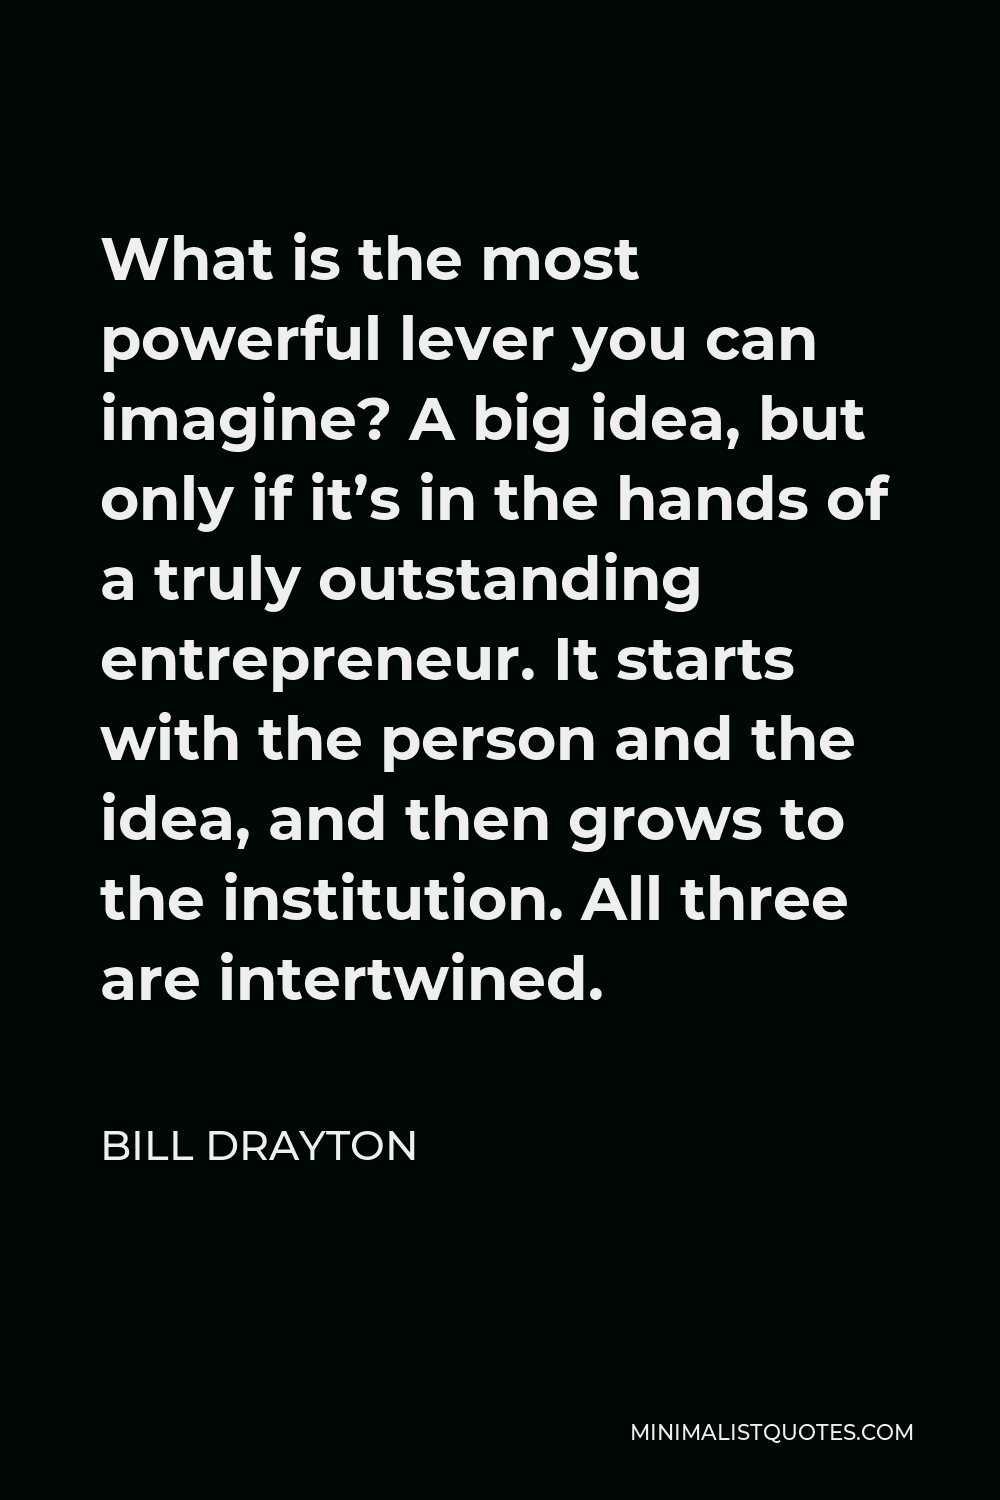 Bill Drayton Quote - What is the most powerful lever you can imagine? A big idea, but only if it’s in the hands of a truly outstanding entrepreneur. It starts with the person and the idea, and then grows to the institution. All three are intertwined.